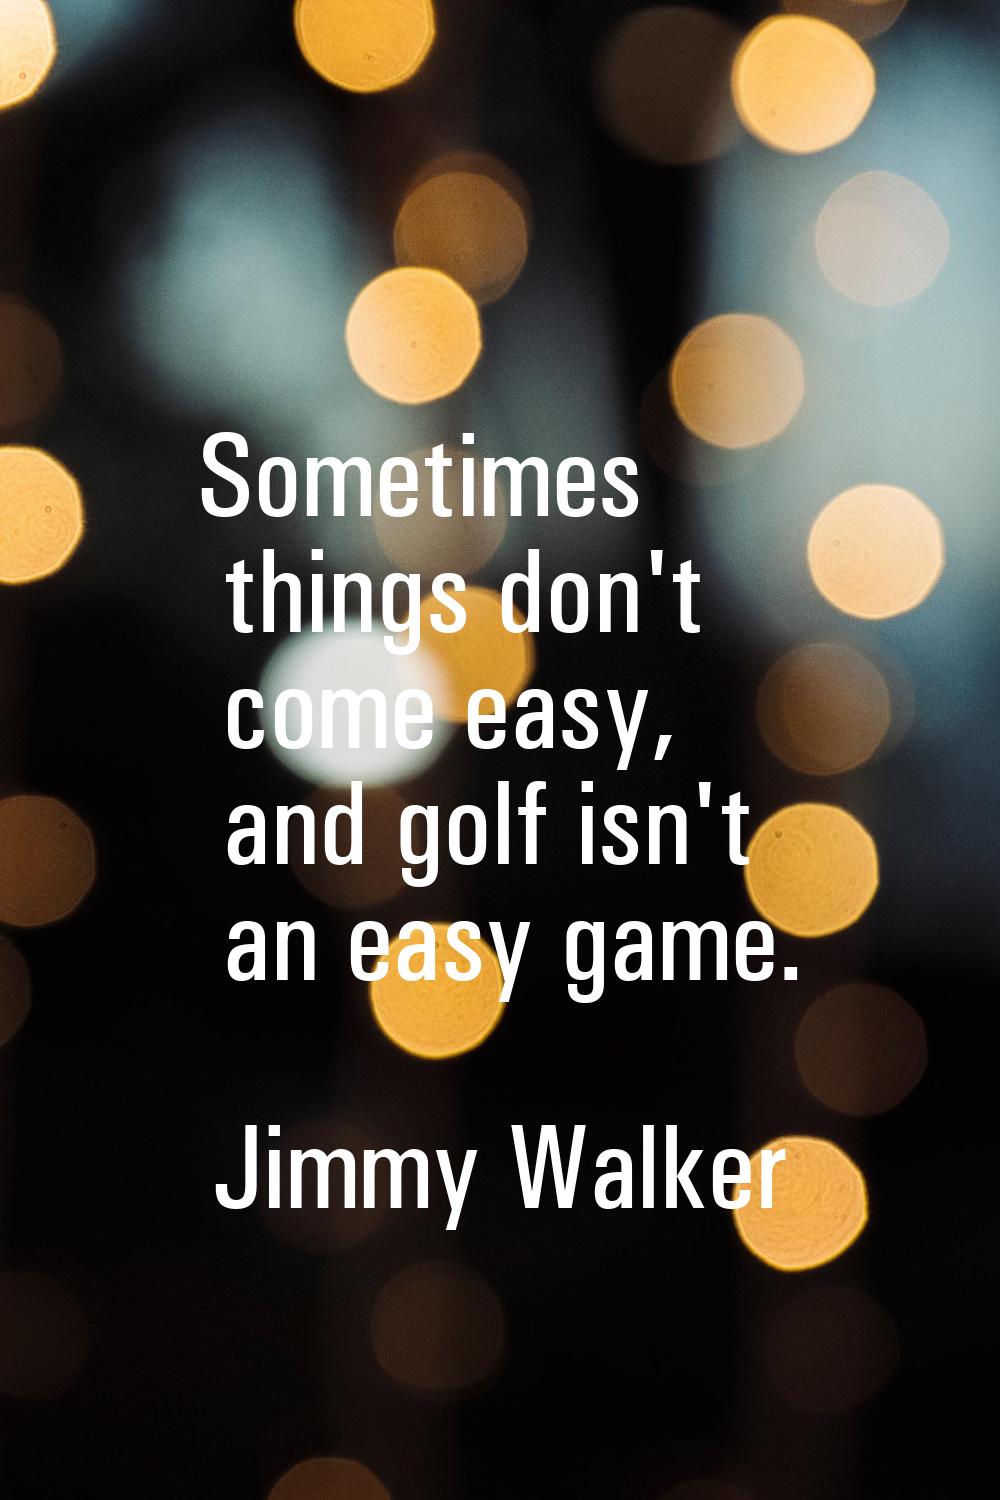 Sometimes things don't come easy, and golf isn't an easy game.